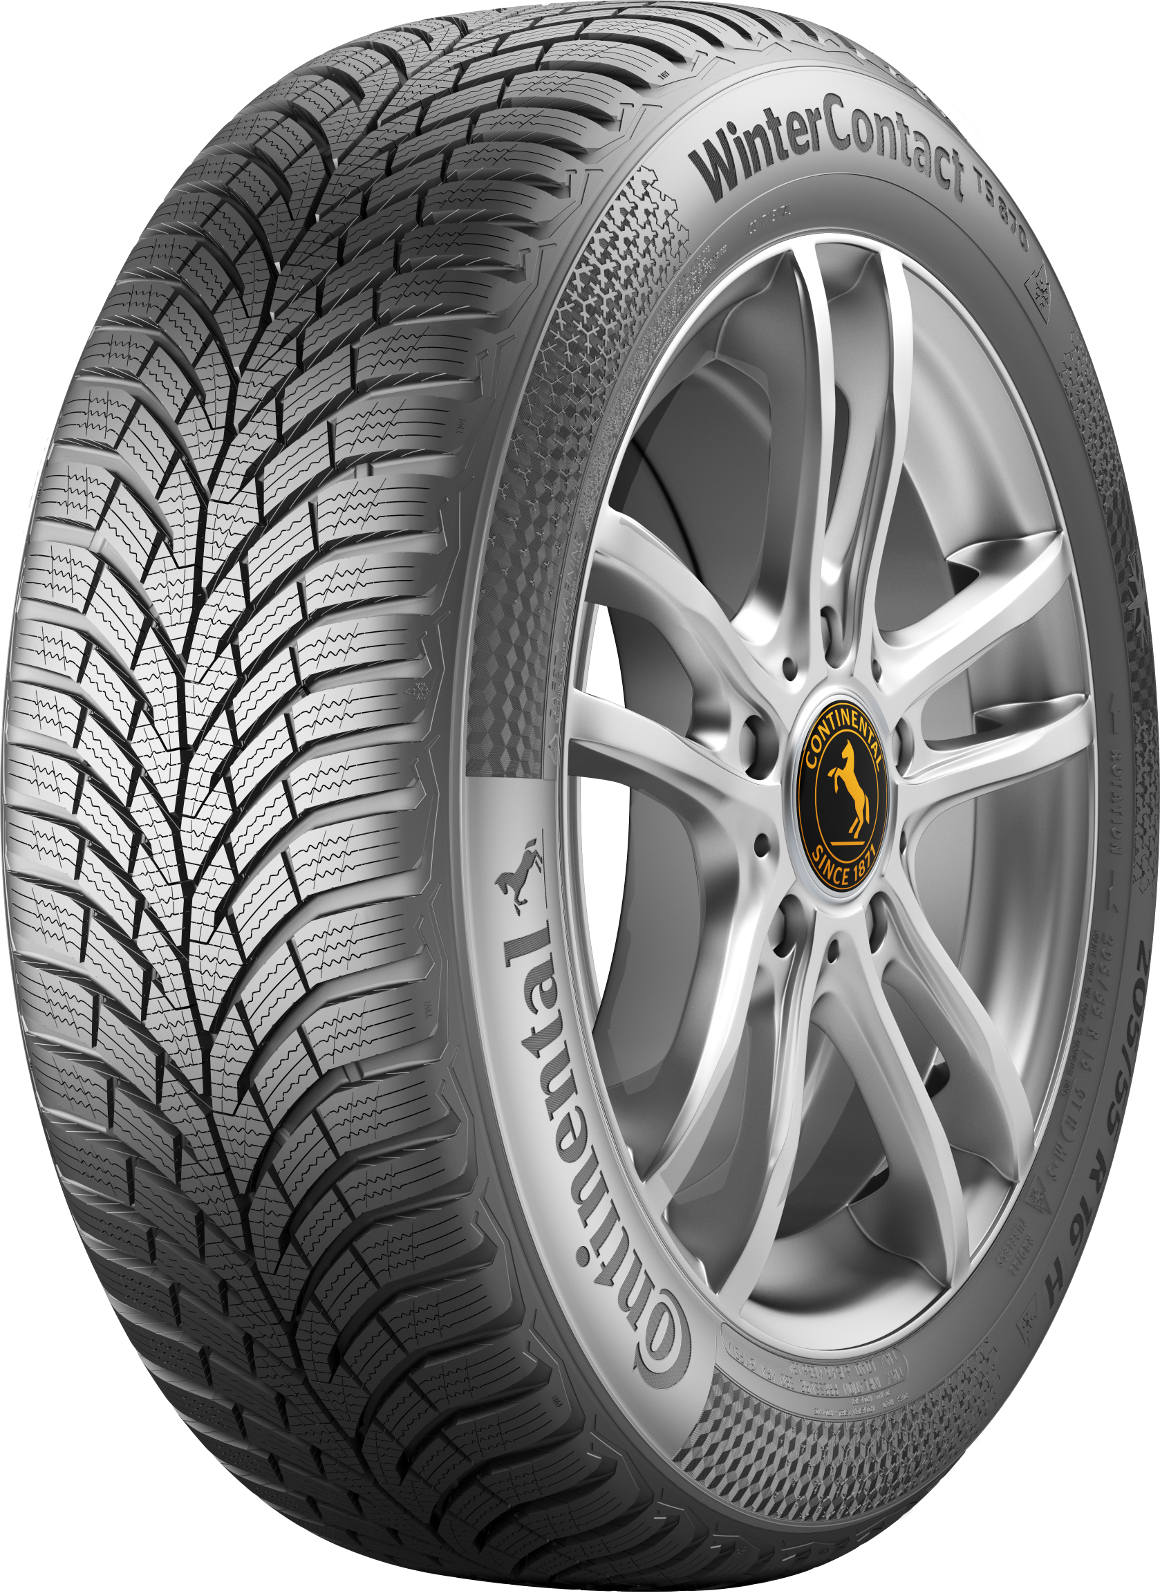 Anvelope Continental Winter Contact Ts870 205/55R16 91T Iarna